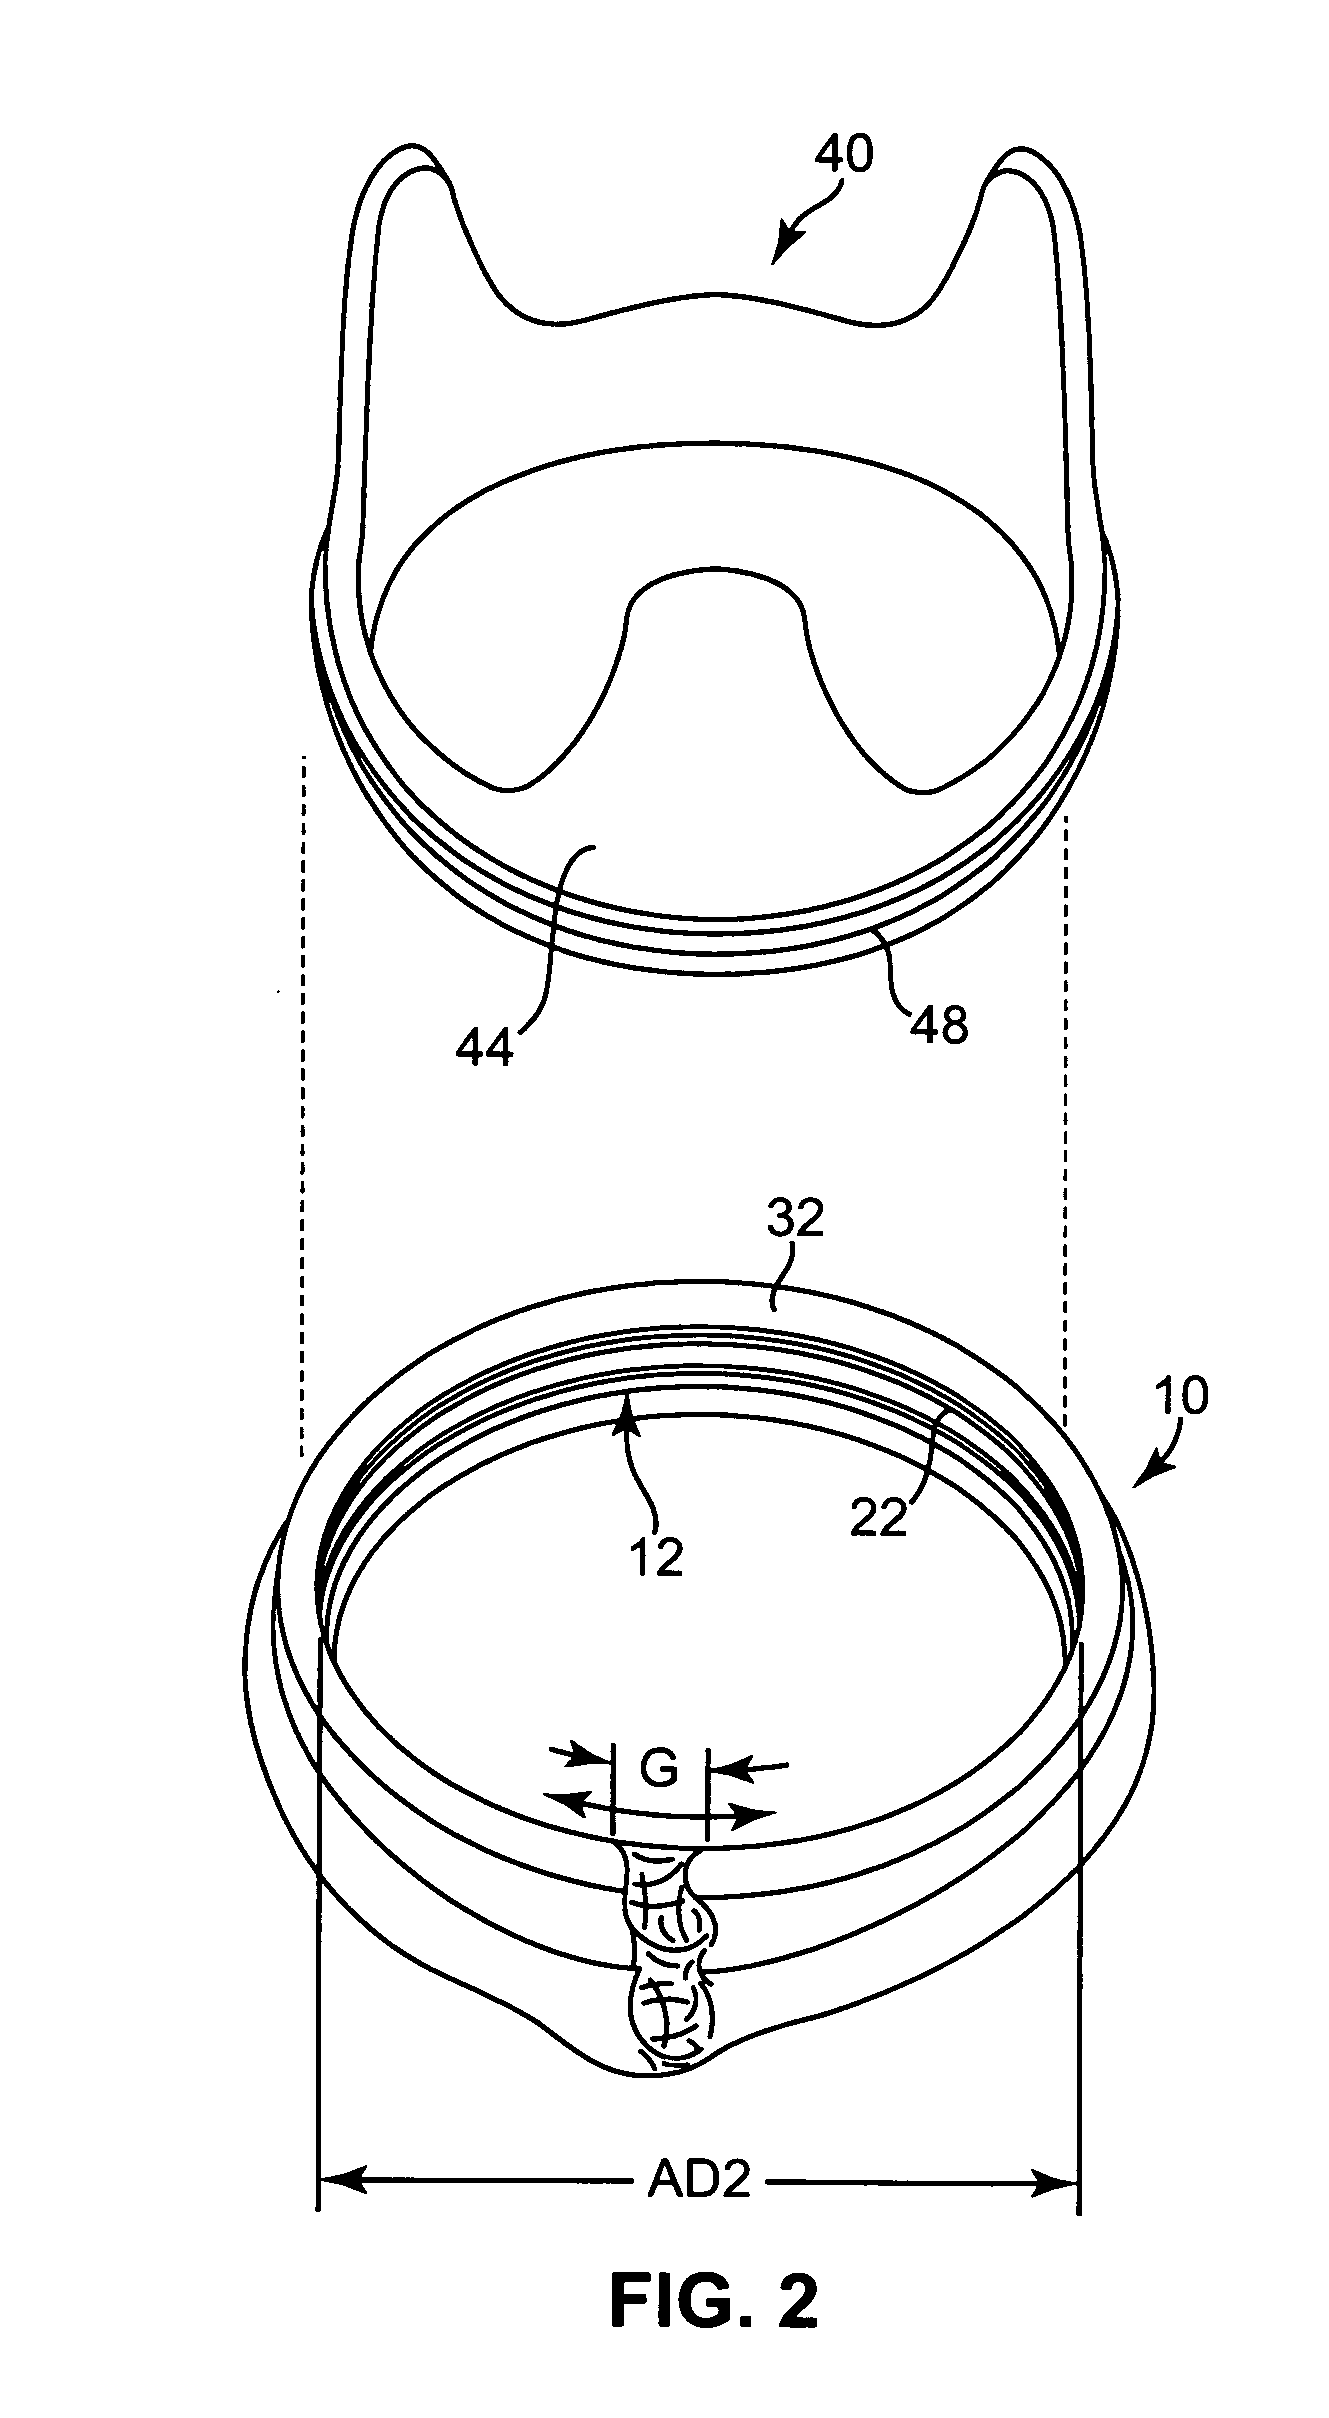 Suturing rings for implantable heart valve prostheses